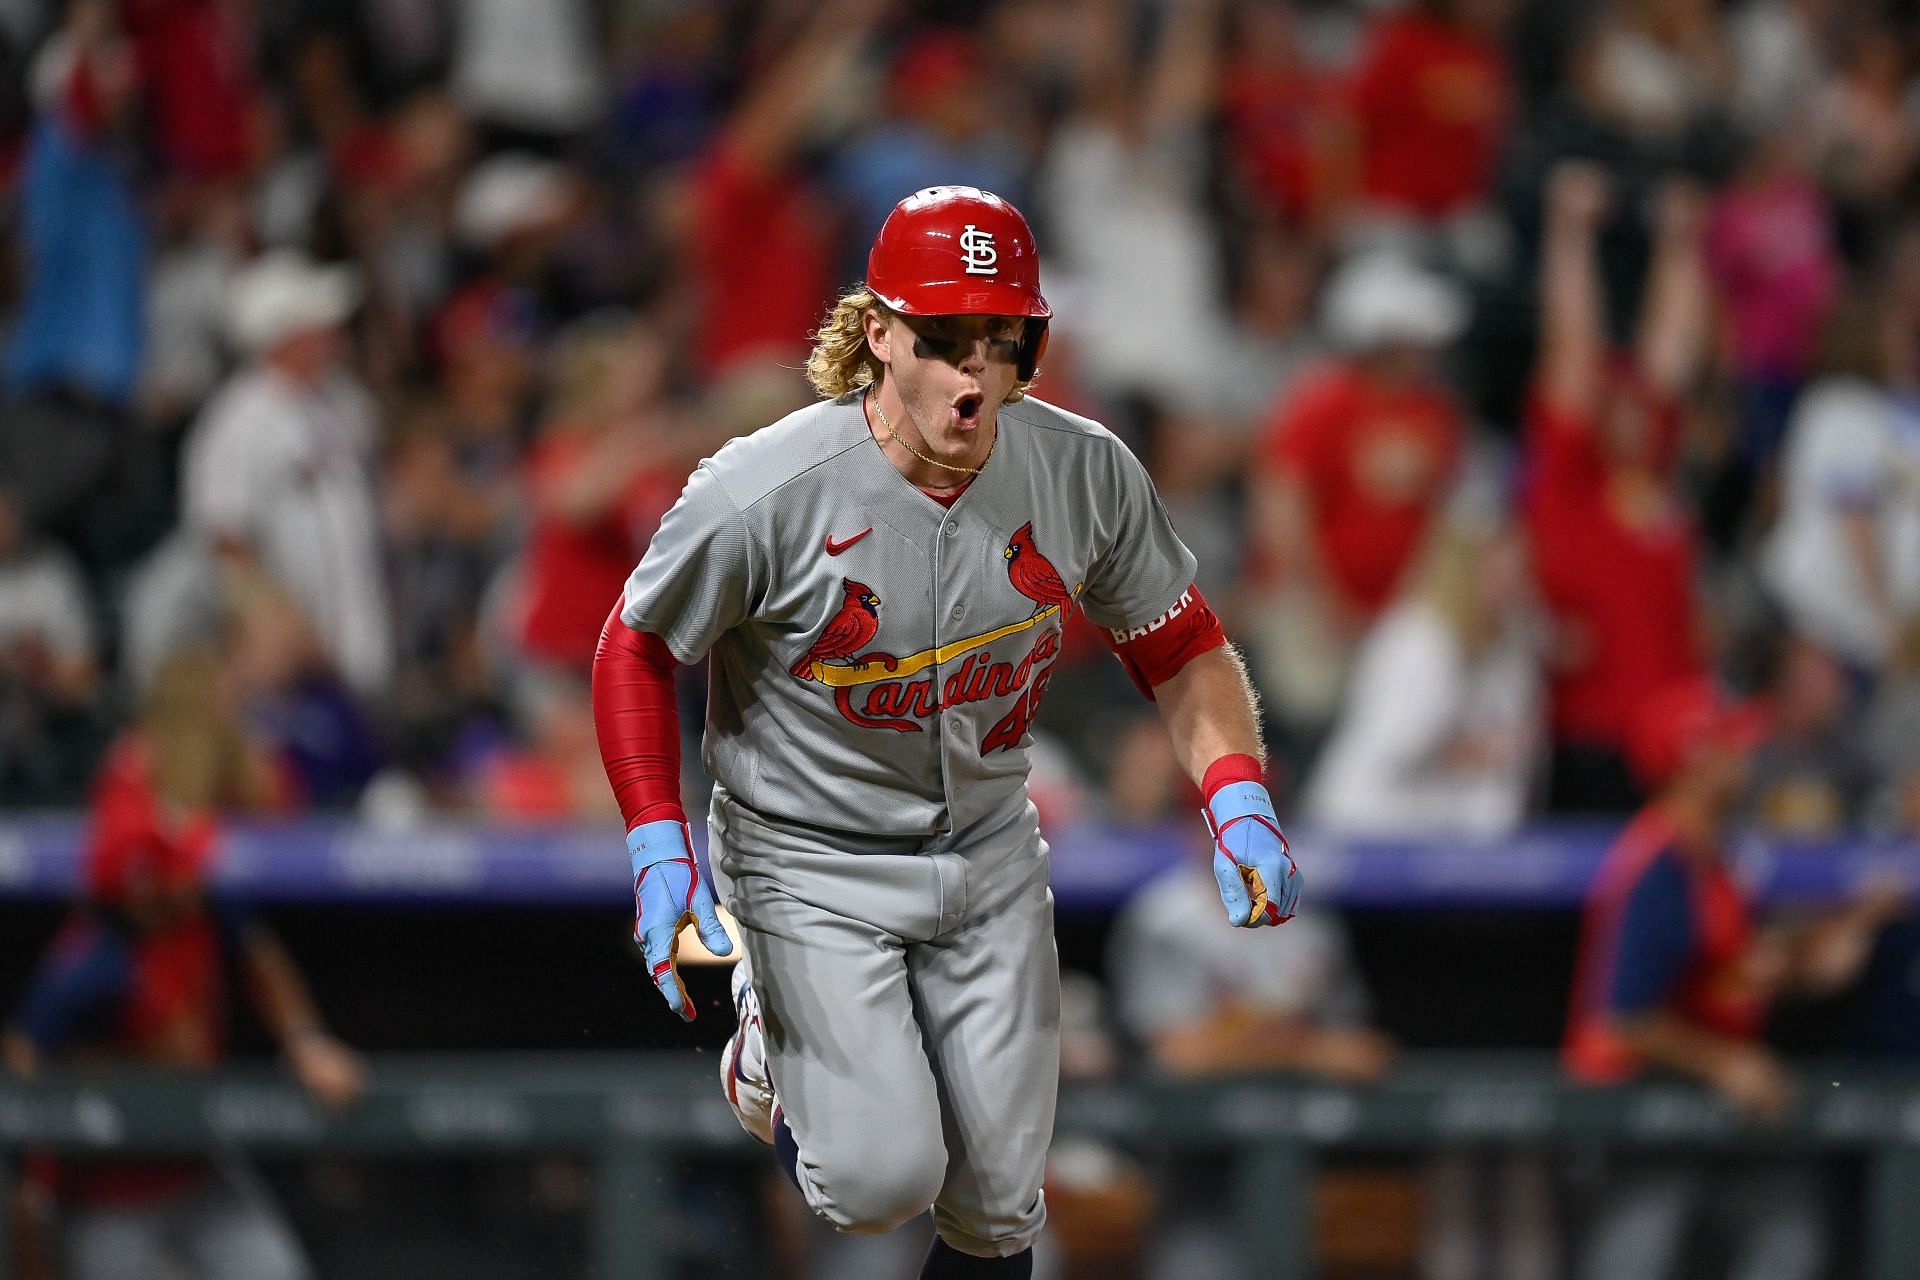 This is a 2022 photo of Harrison Bader of the St. Louis Cardinals